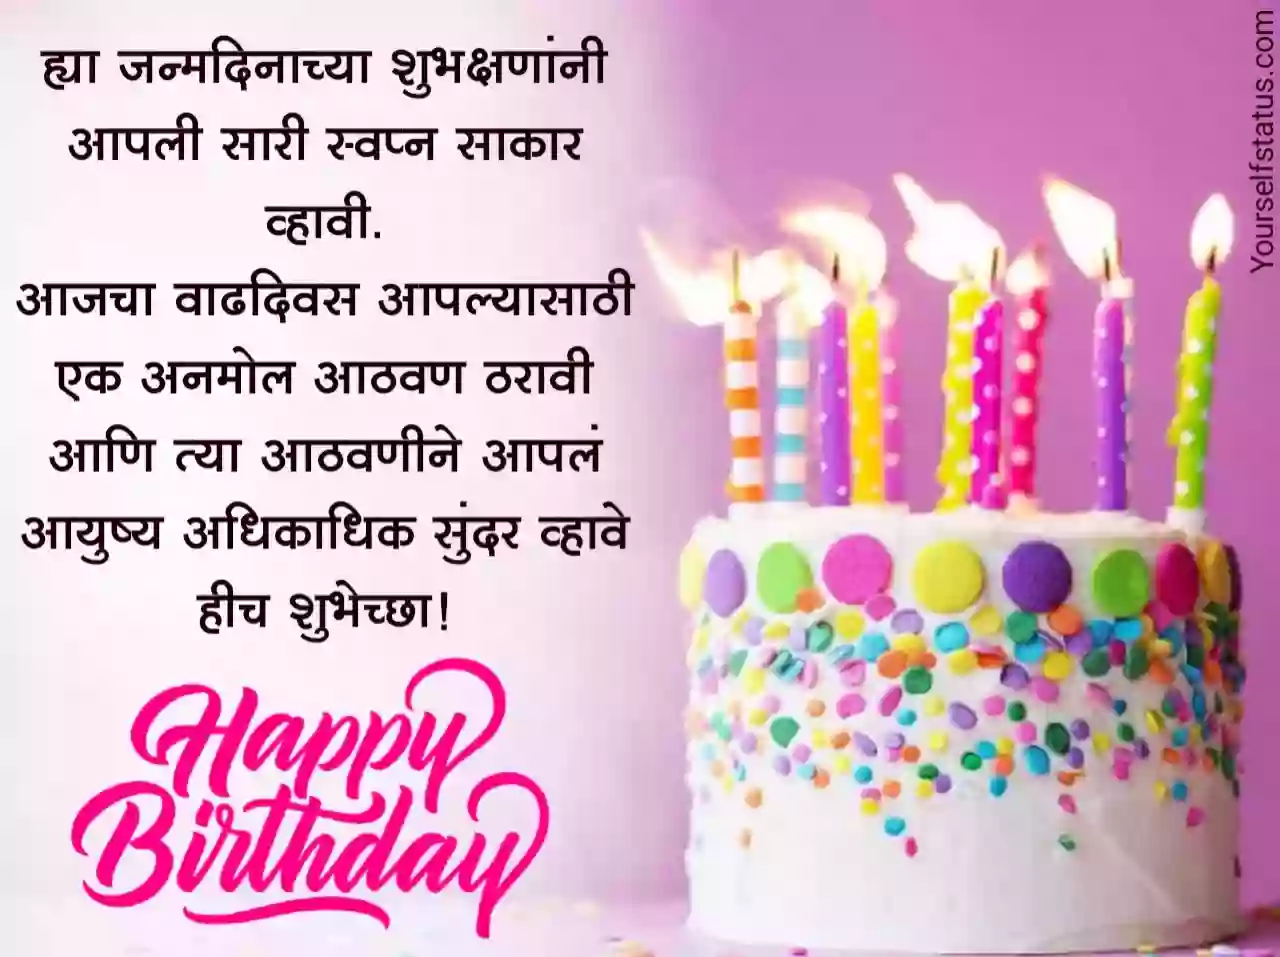 birthday images for friend in marathi